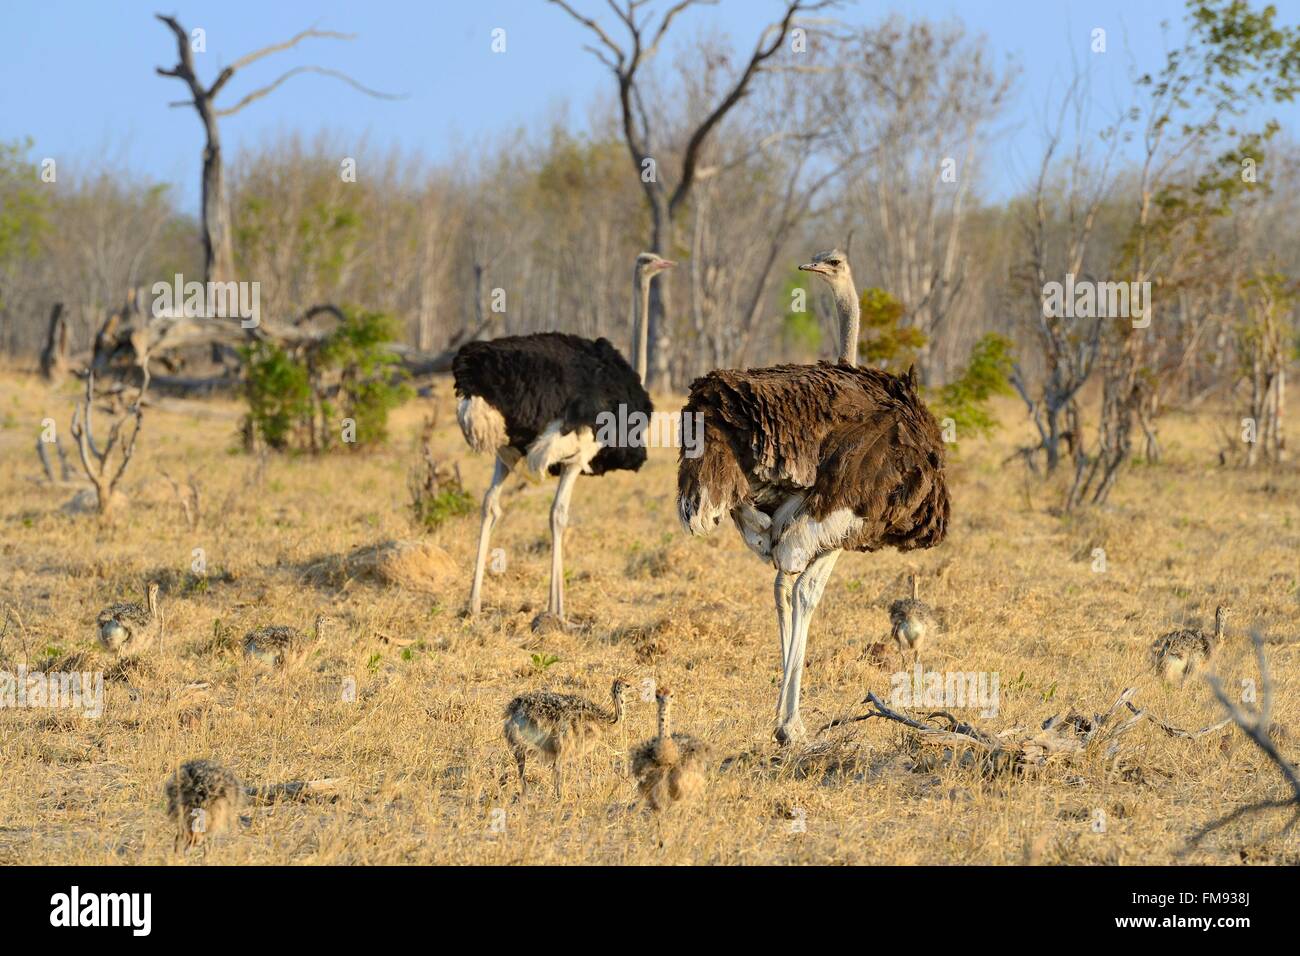 Zimbabwe, Matabeleland North Province, Hwange National Park, ostrich (Struthio camelus) couple, the male with black plumage and the female brown plumage Stock Photo